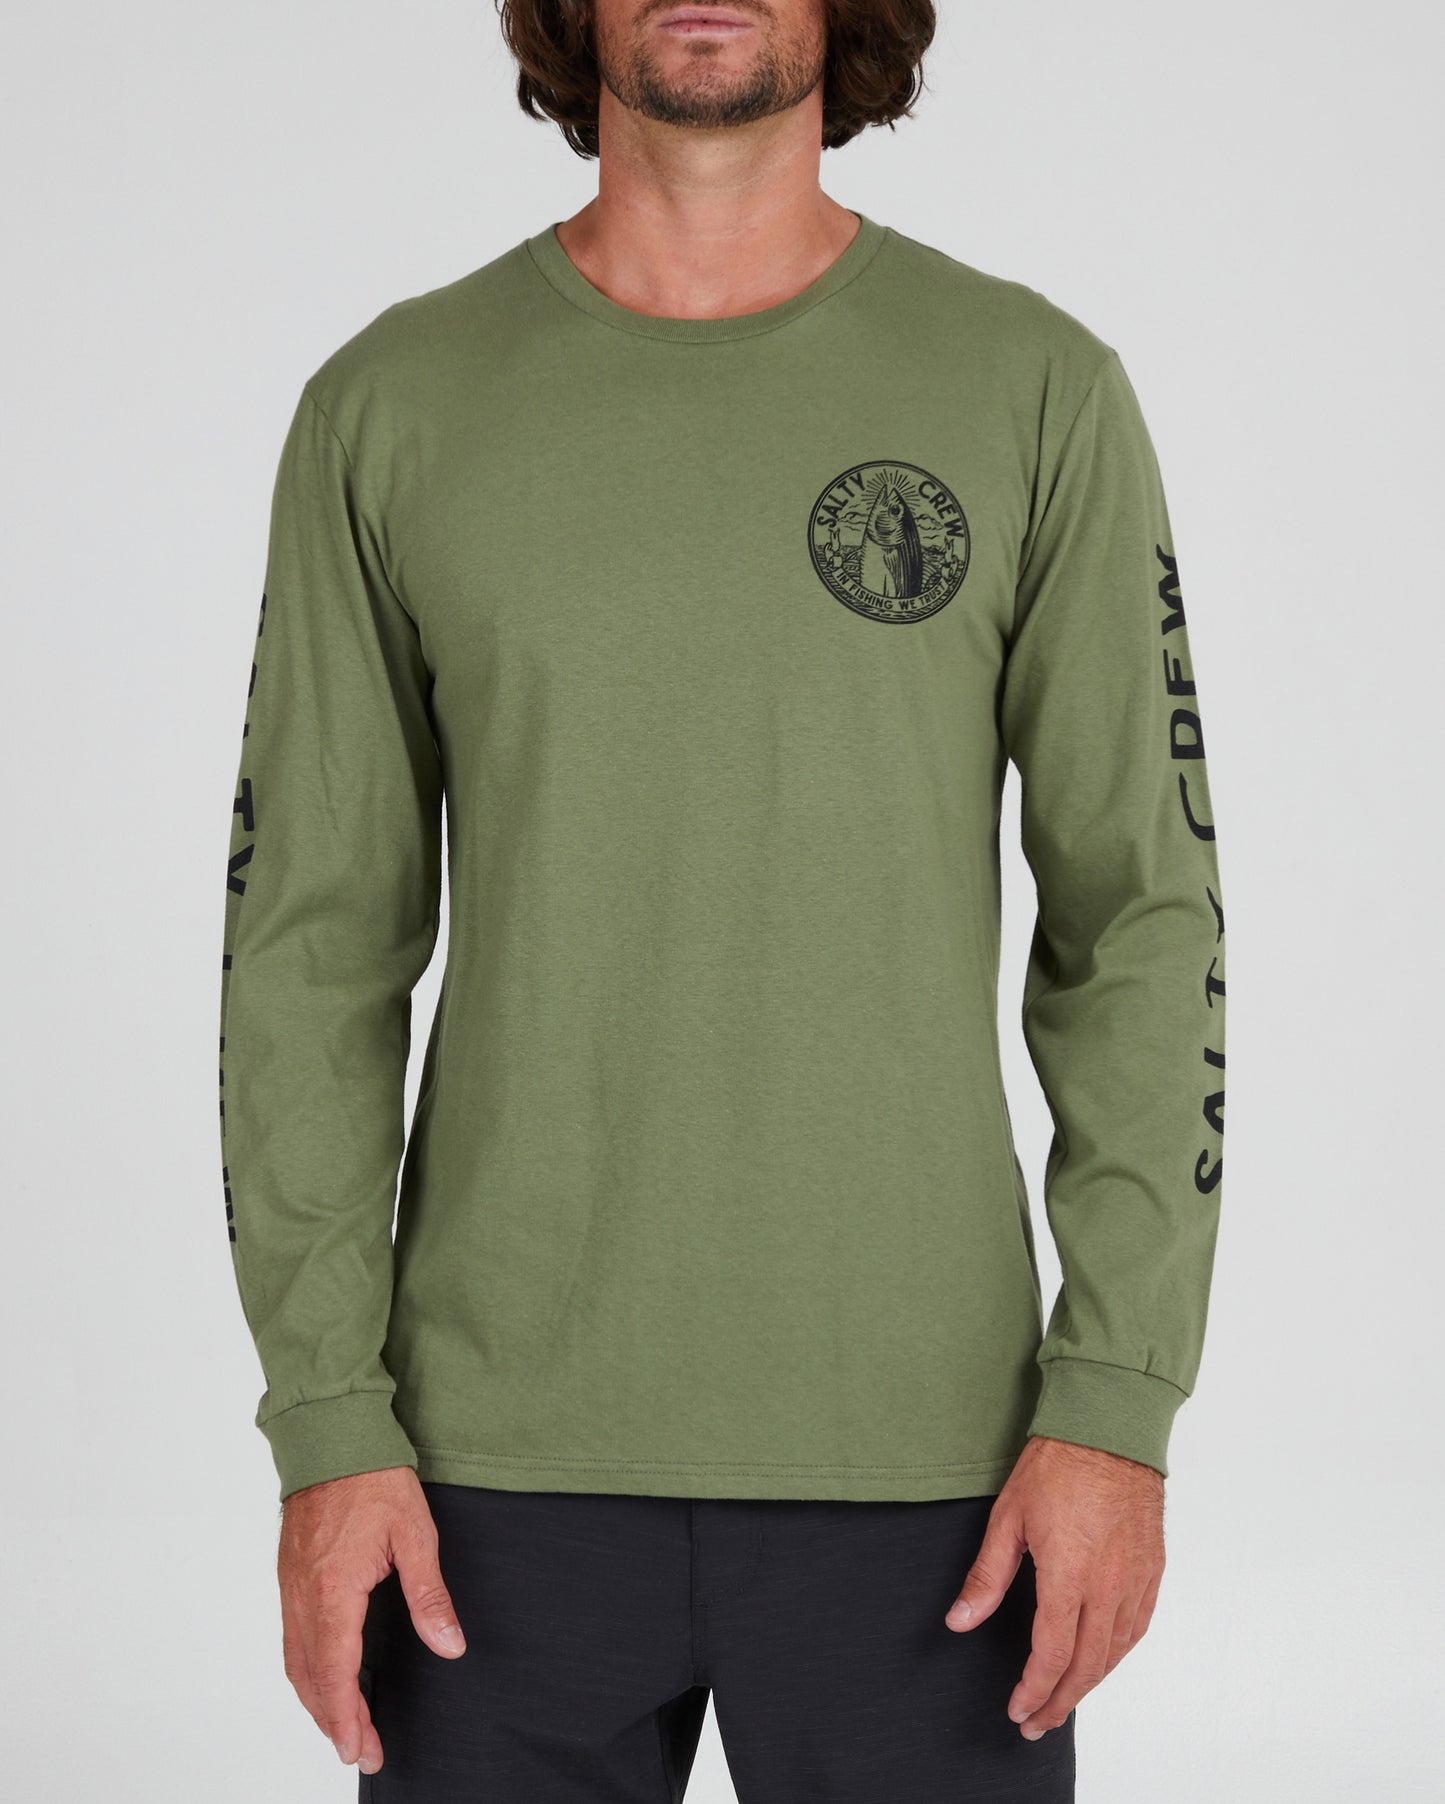 On body front of the In Fishing We Trust Sage Green L/S Premium Tee